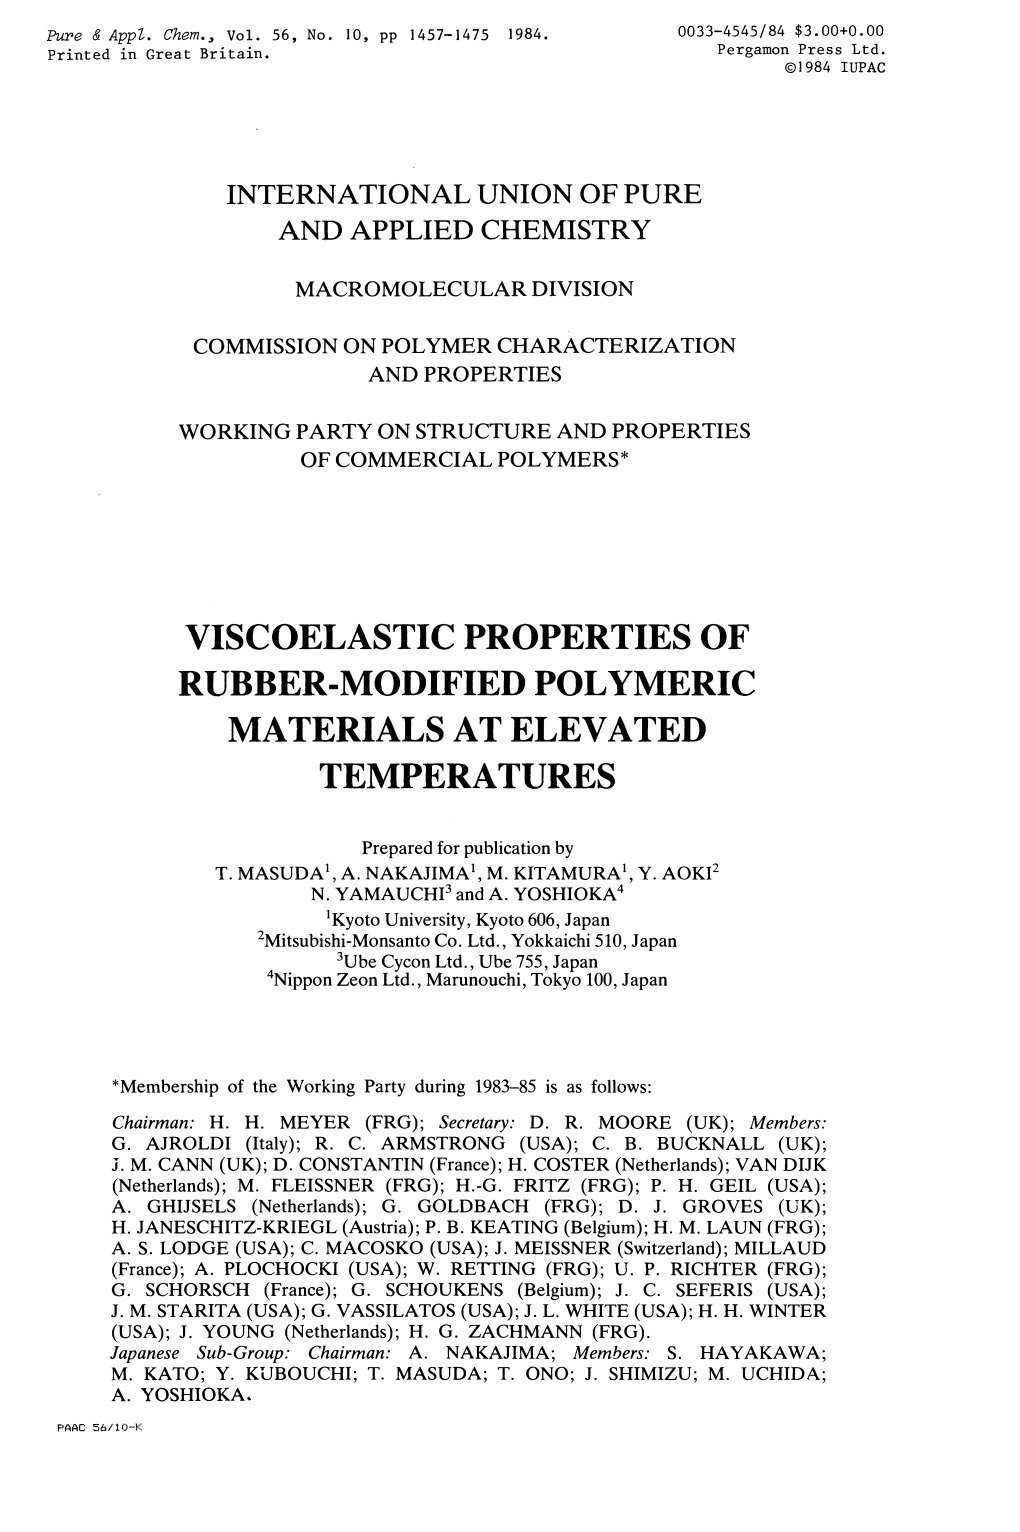 Viscoelastic Properties of Rubber-Modified Polymeric Materials at Elevated Temperatures